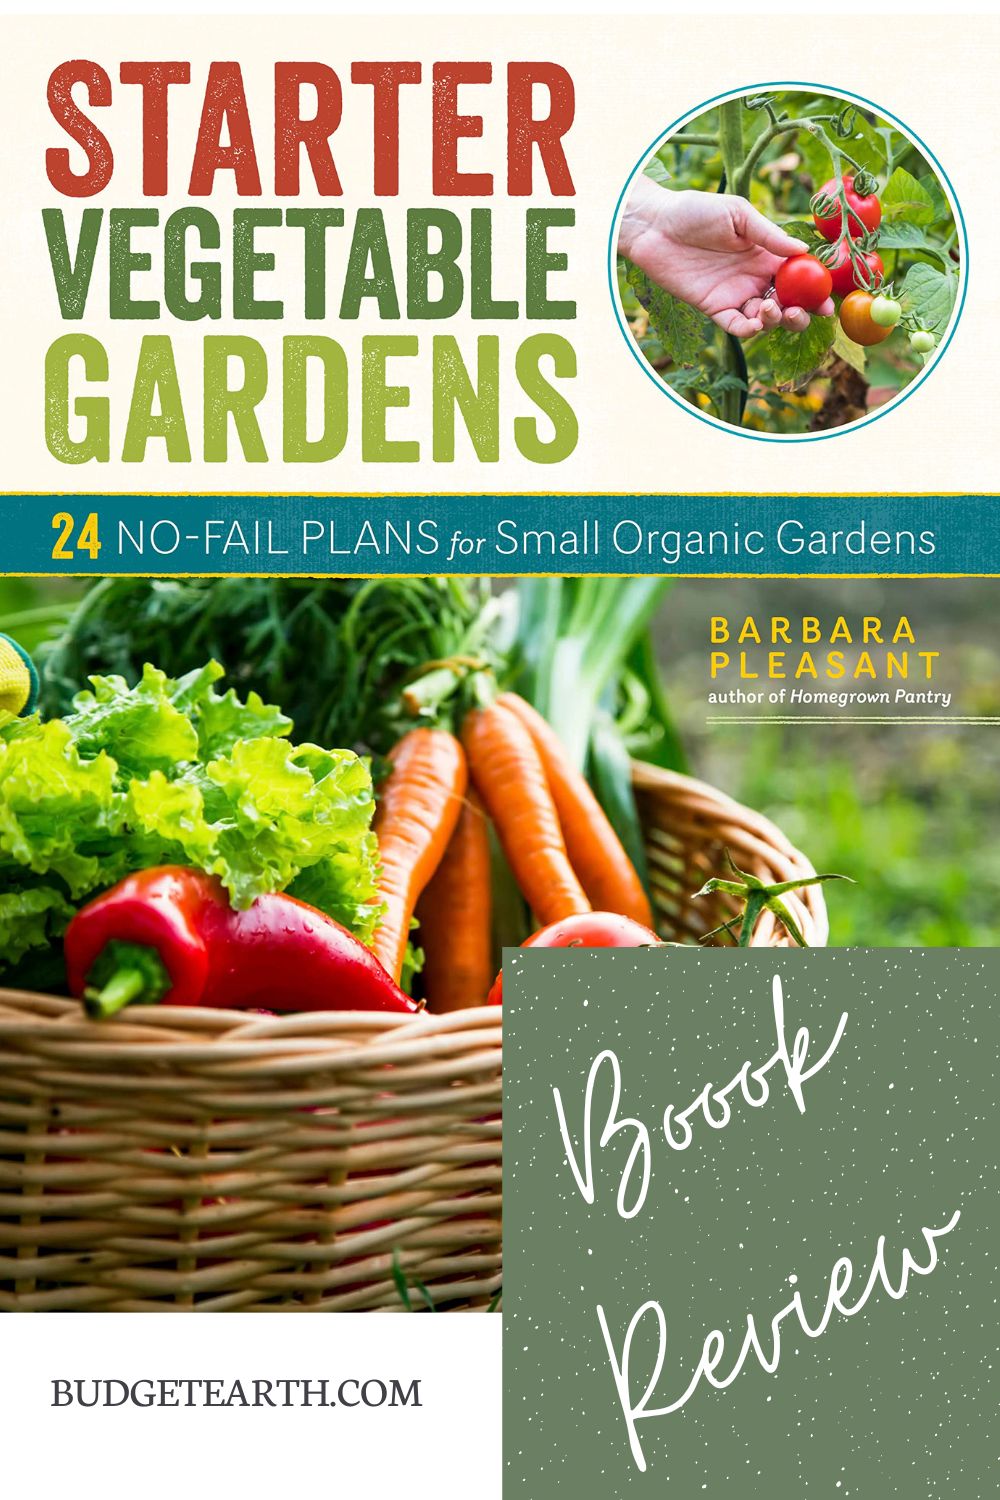 book review image of book cover of starter vegetable gardens